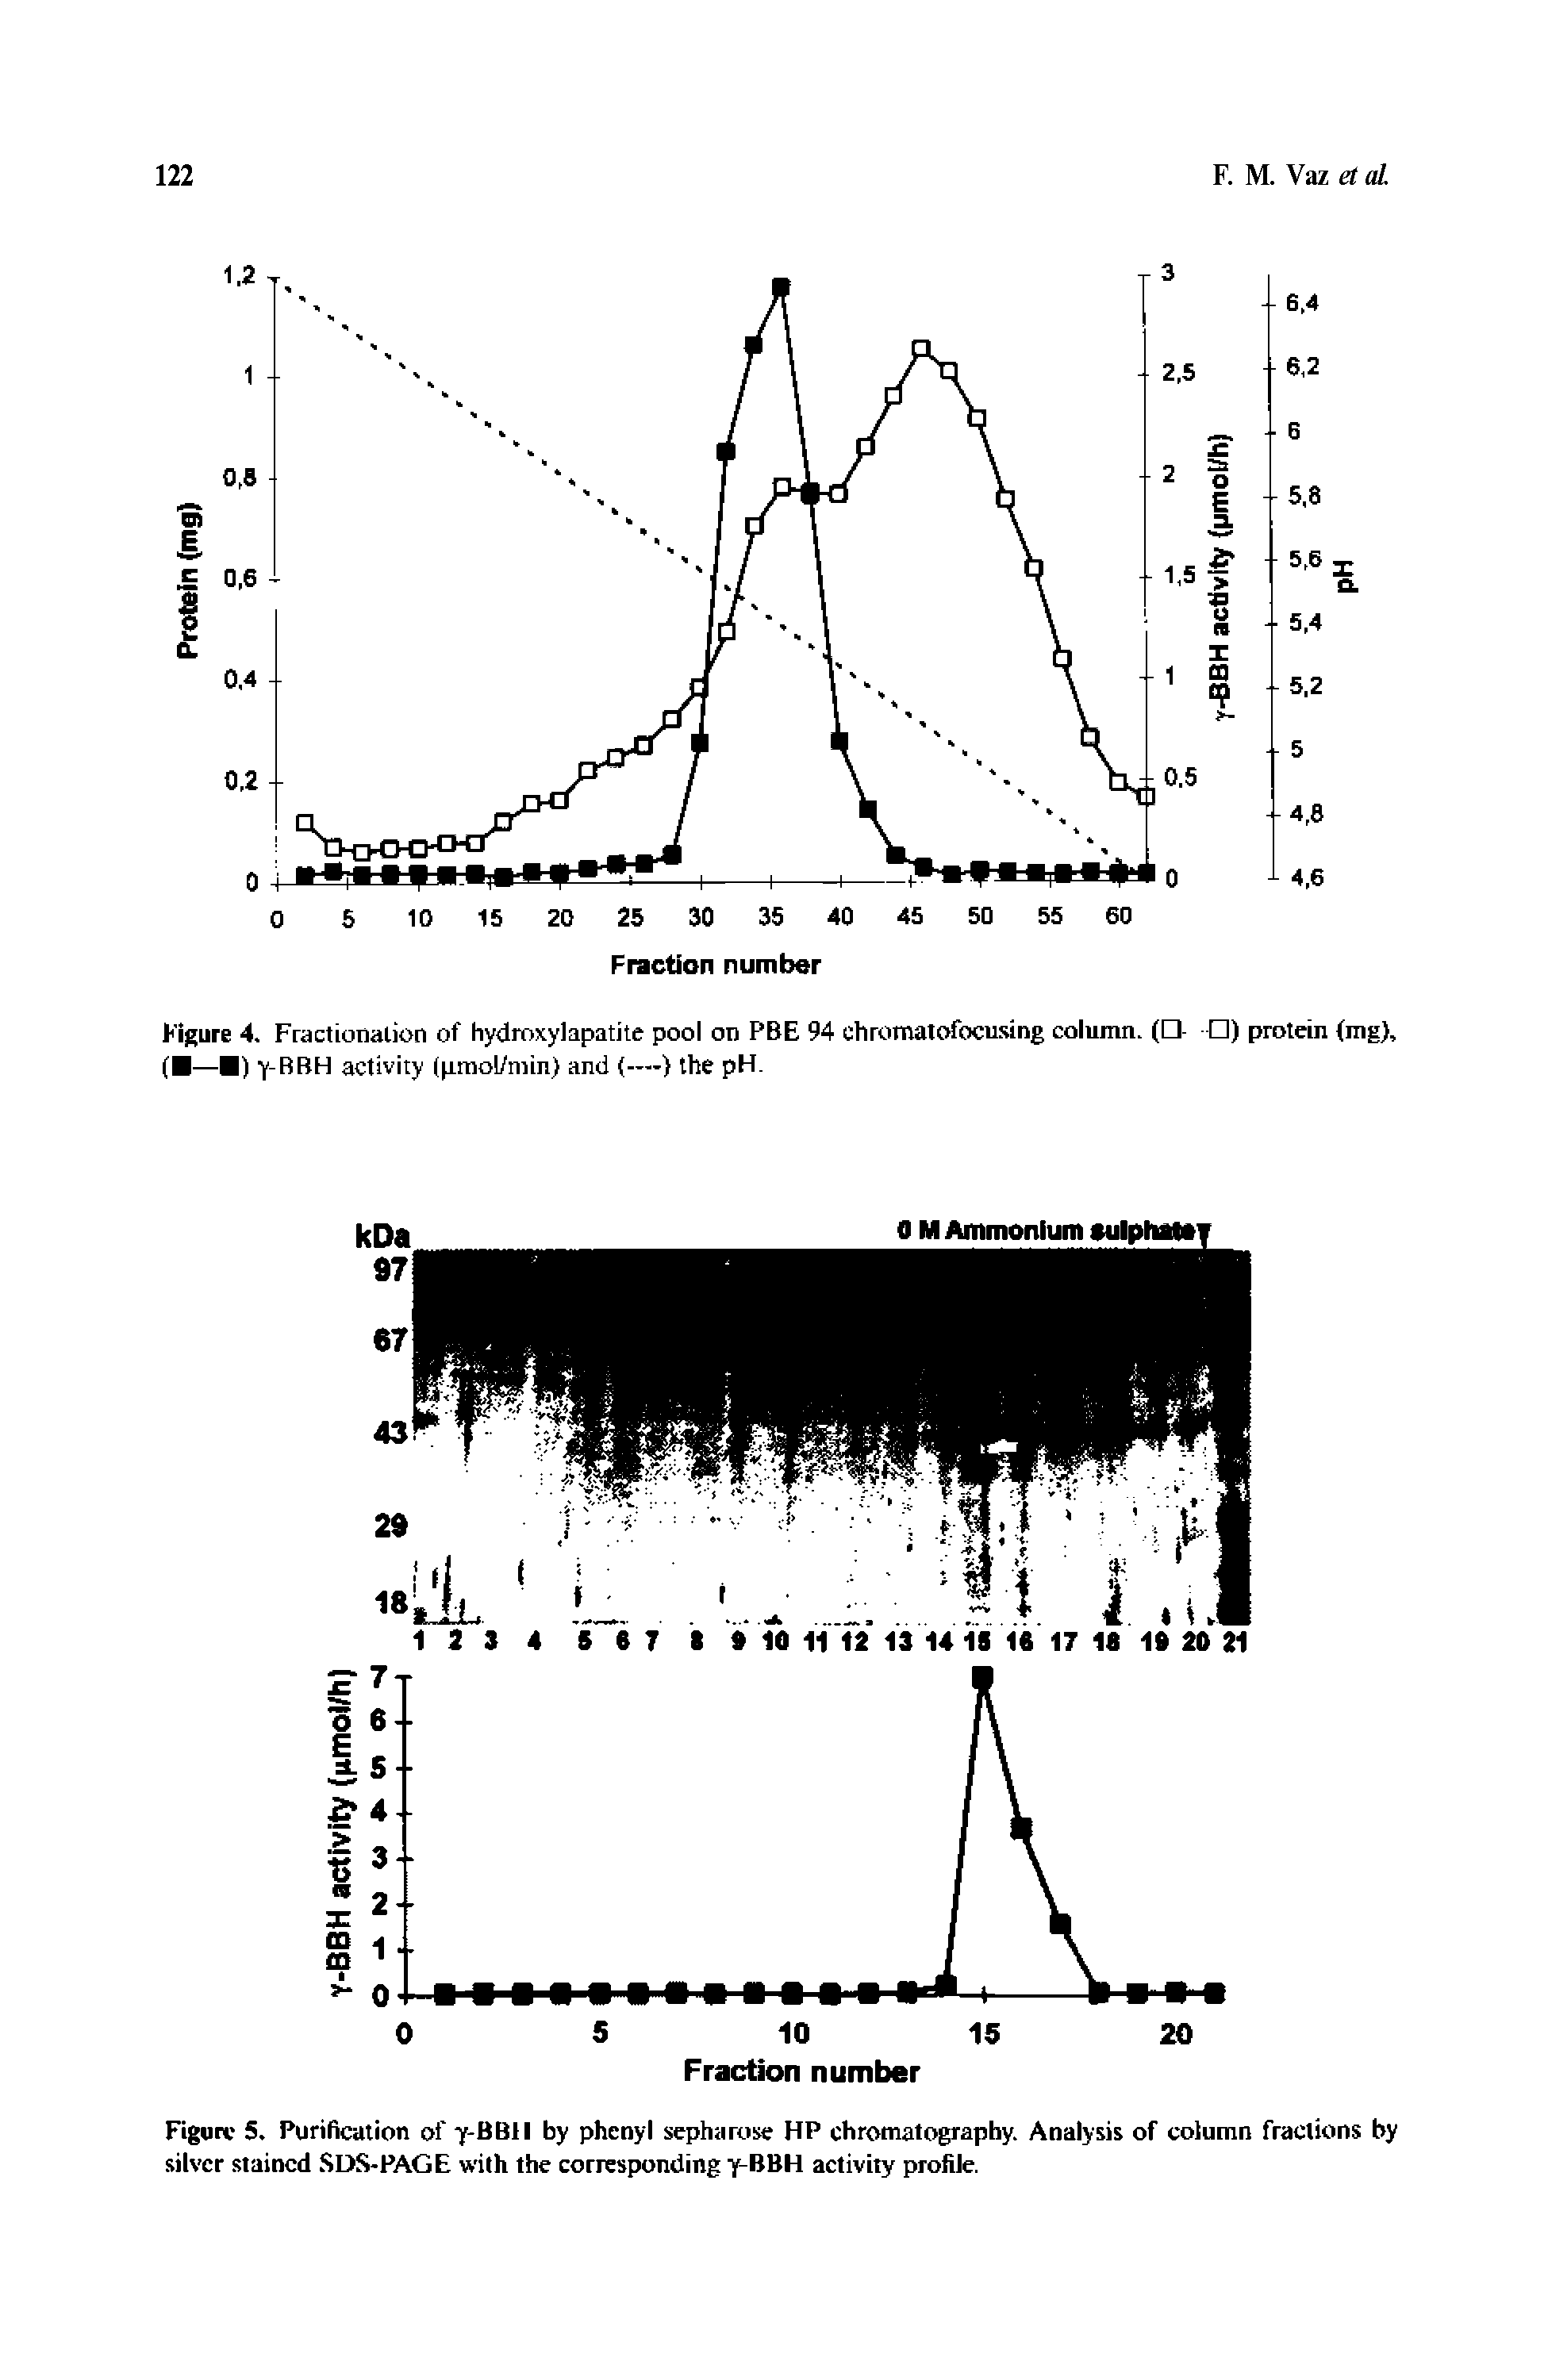 Figure 5. PuriHcation of y-BBlI by phenyi sepharose HP chromatography. Anaiysis of column fractions by silver stained SDS-PAGE with the corresponding y-BBH activity profile.